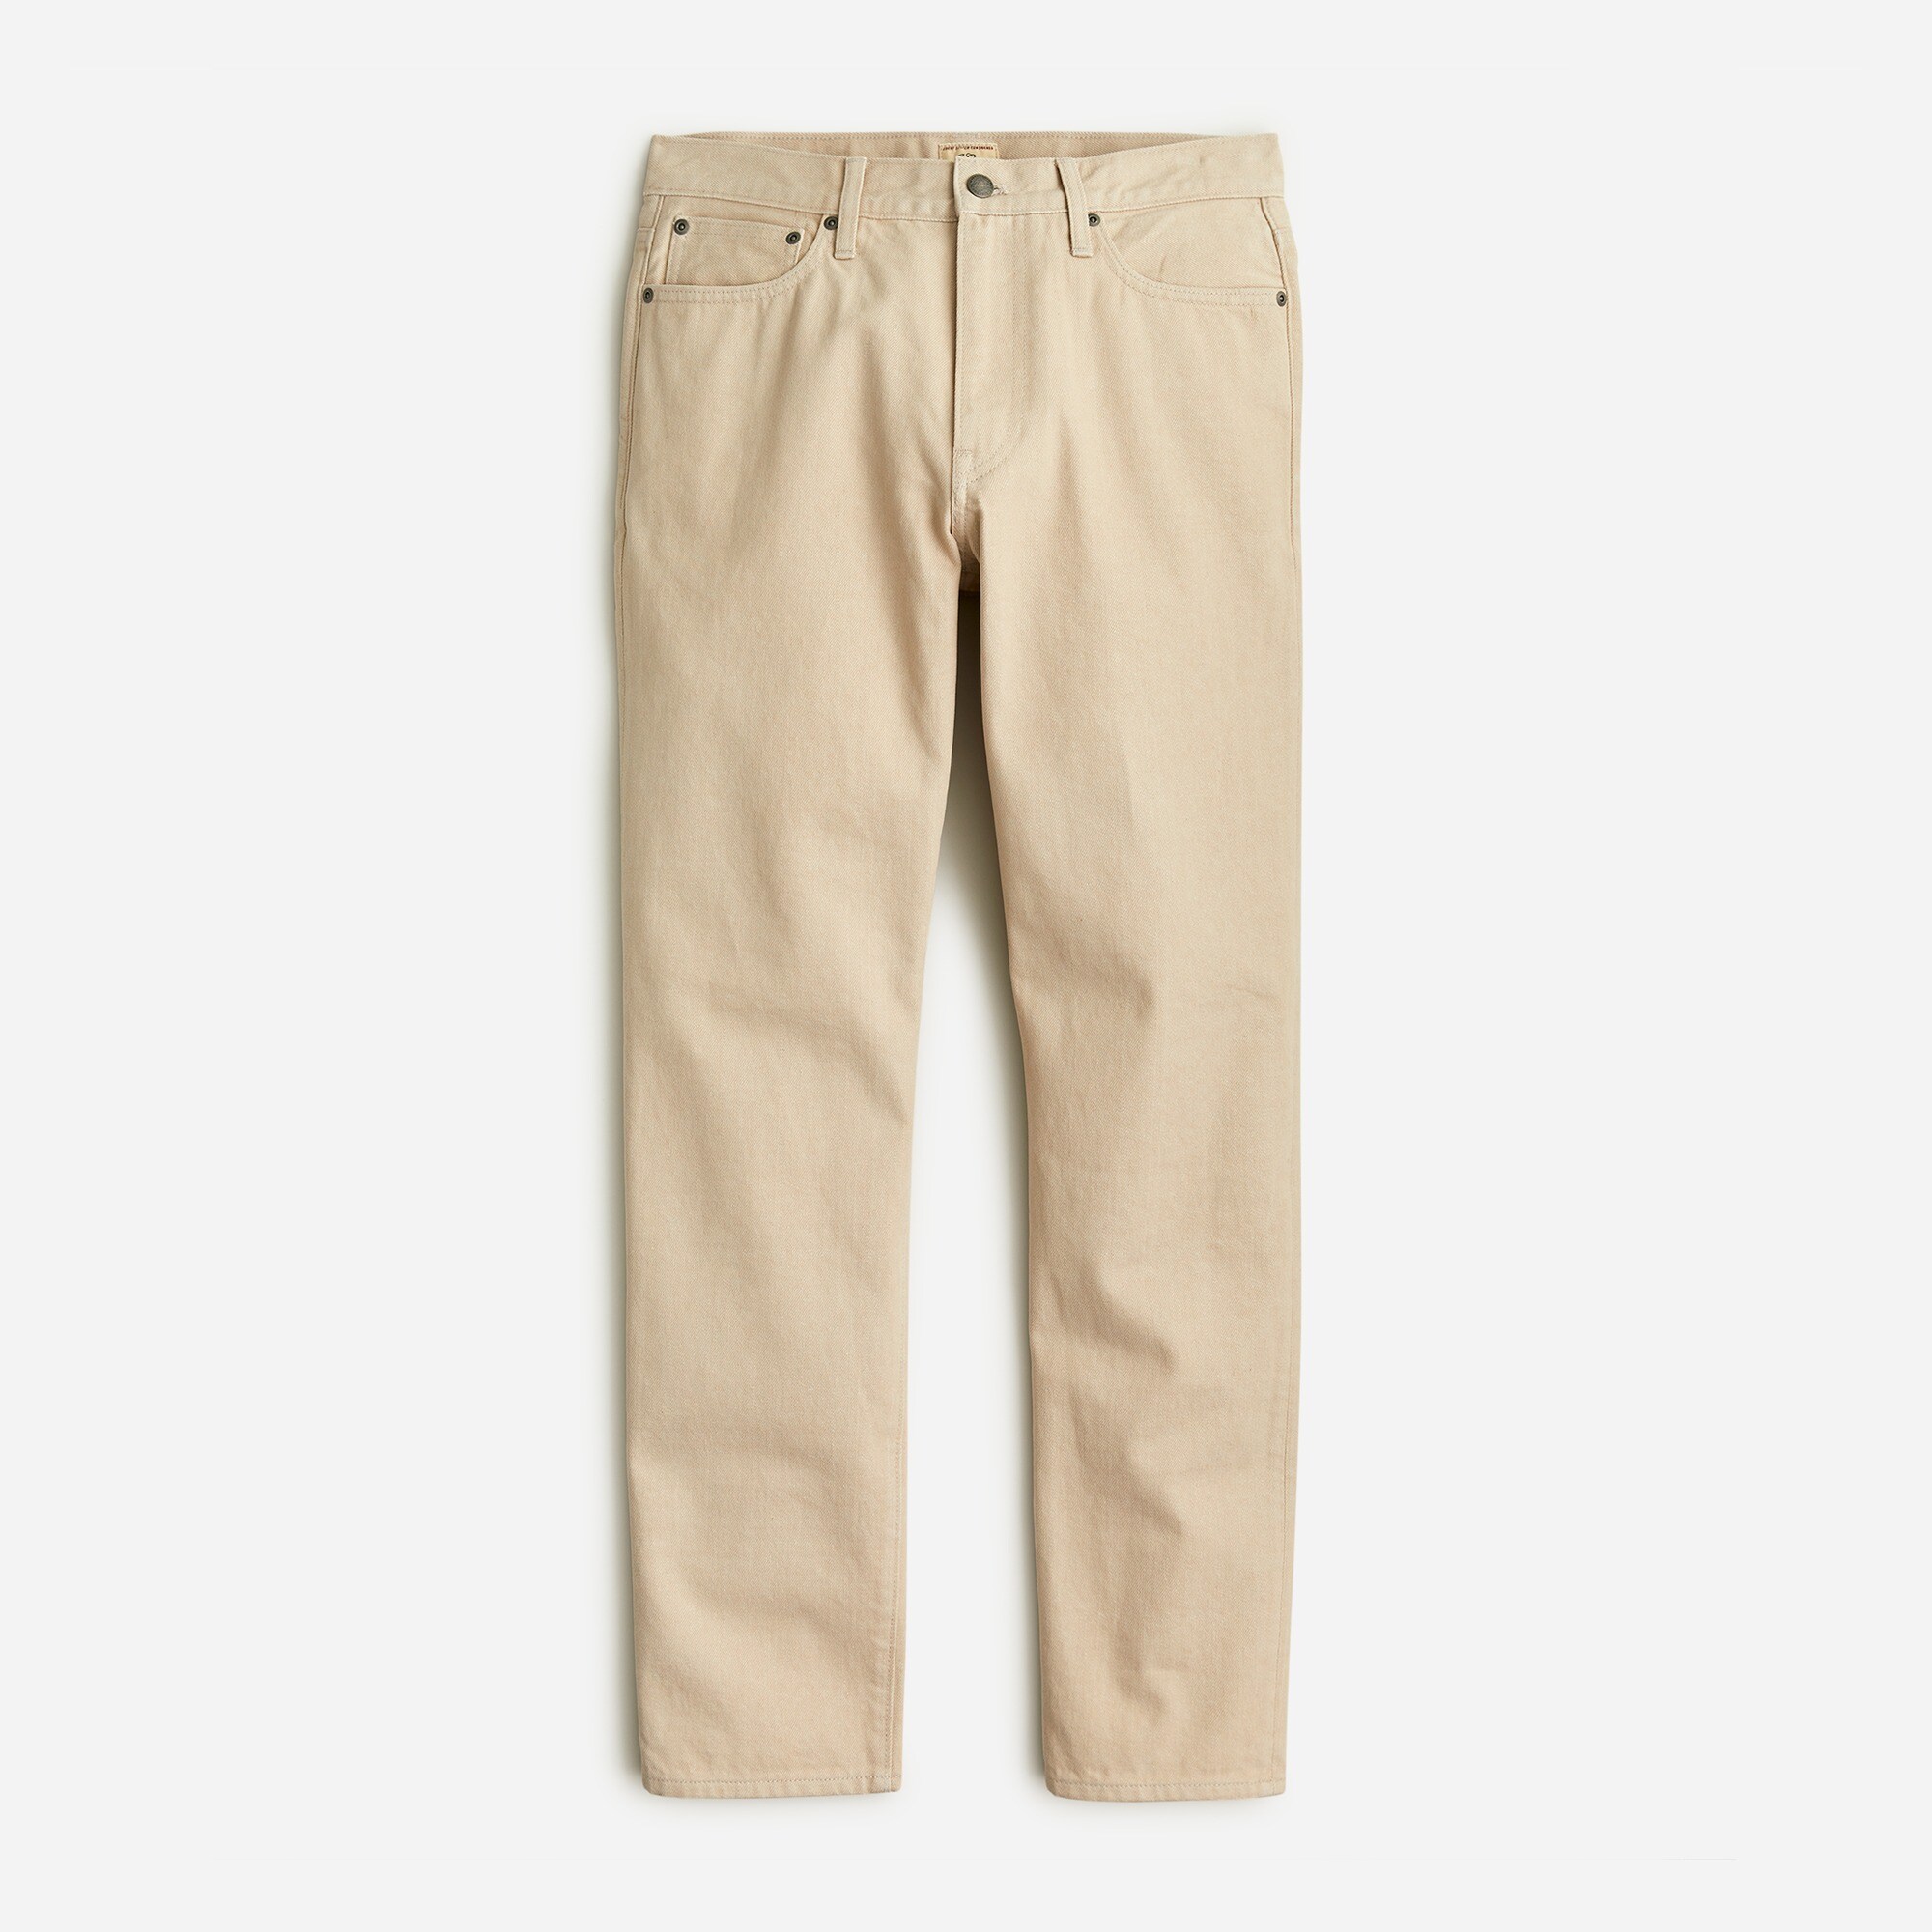  Limited-edition Classic Straight-fit jean in tan